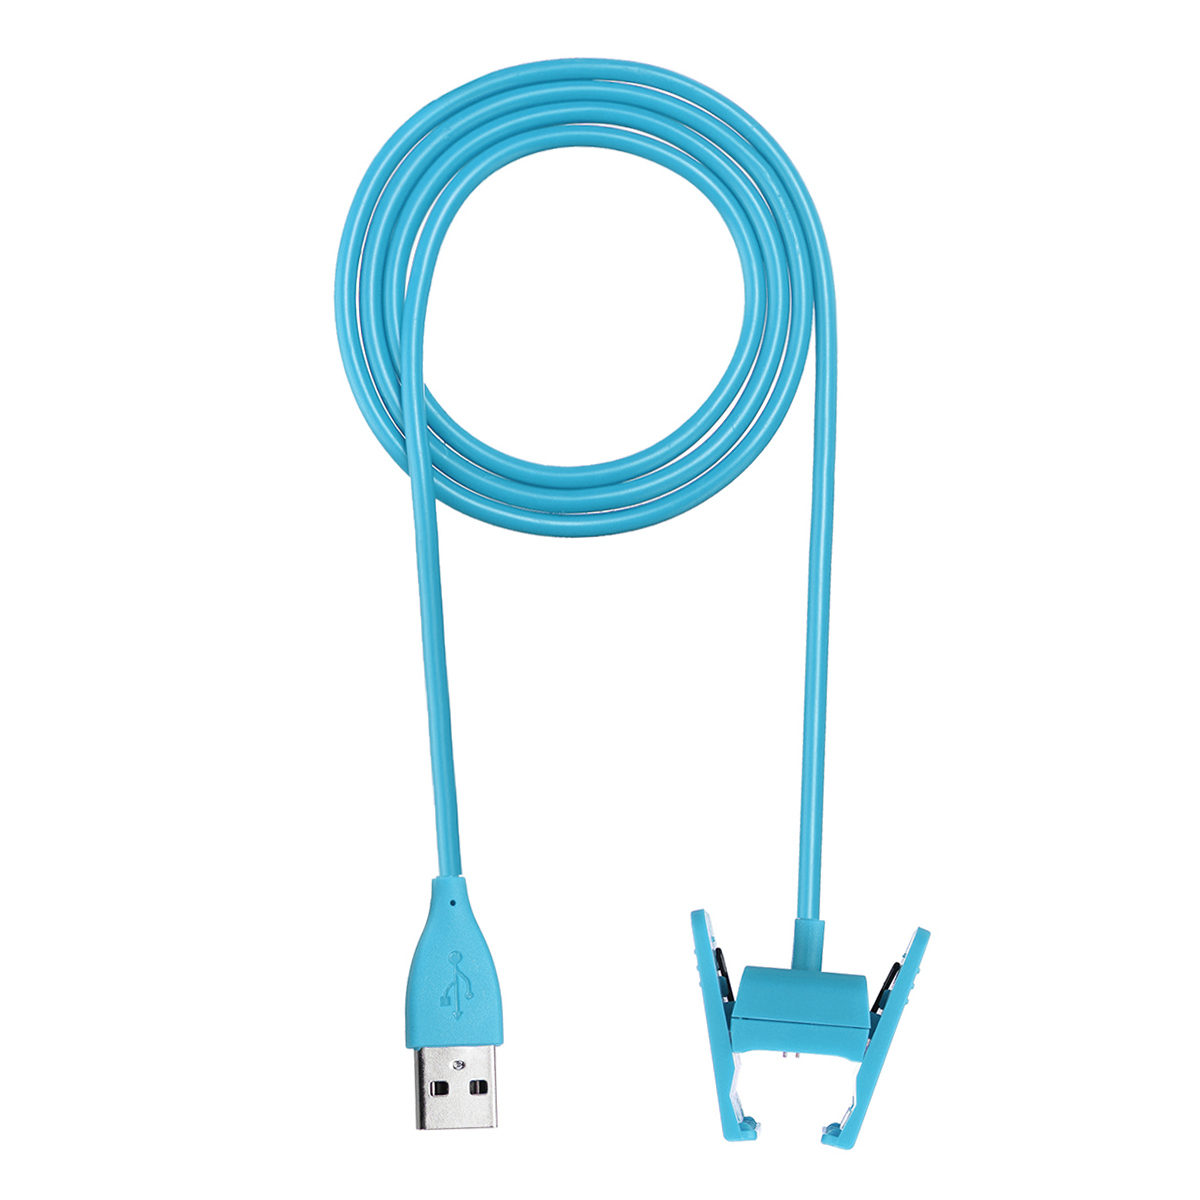 KALOAD-1m-USB-Charging-Cable-Replacement-Charger-For-Fitbit-Charge-2-Smart-Bracelet-Wristband-1352607